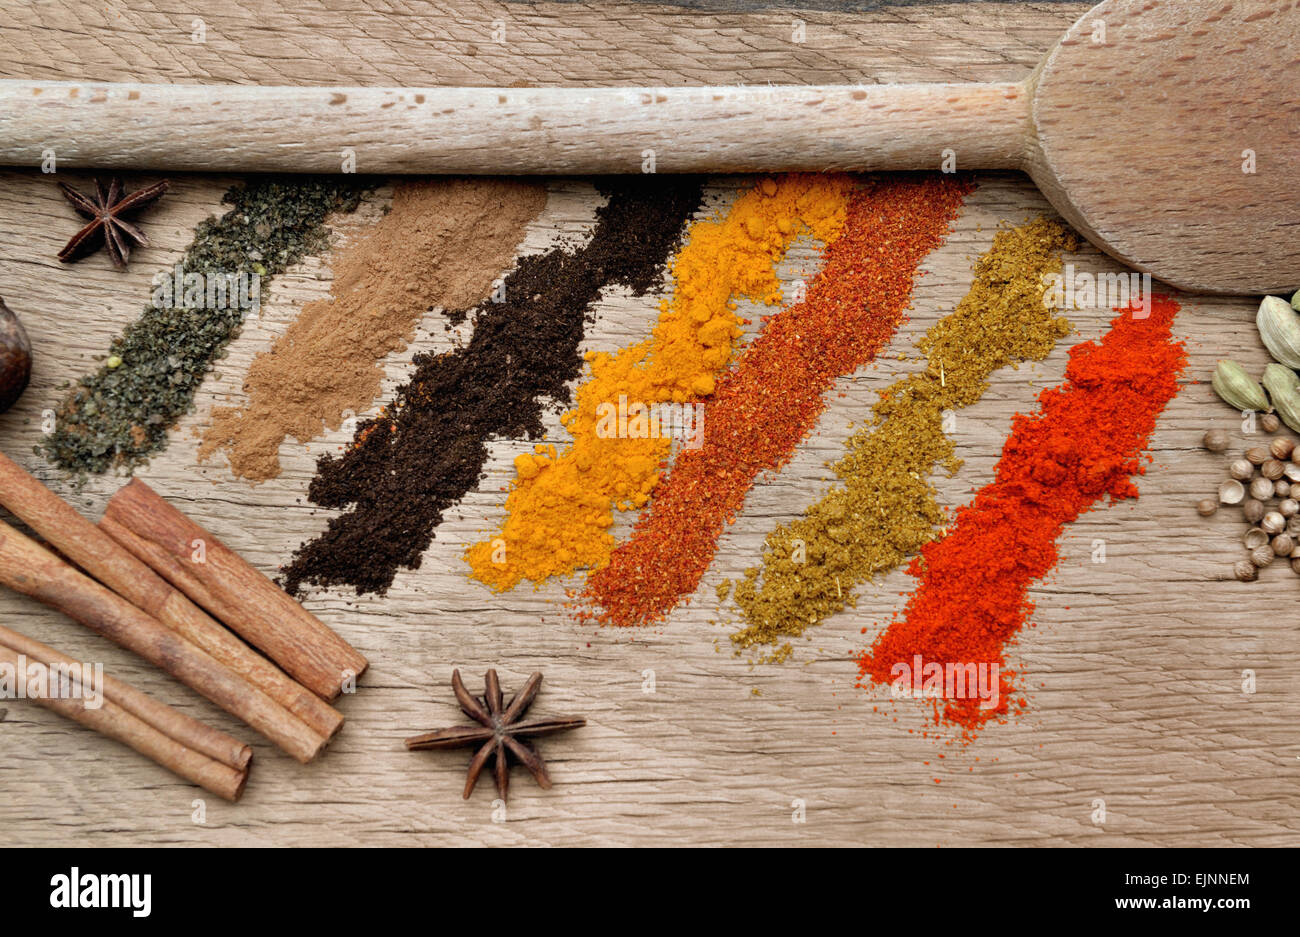 bands of different spices powder, anise and cardamom and spoon on wood background Stock Photo